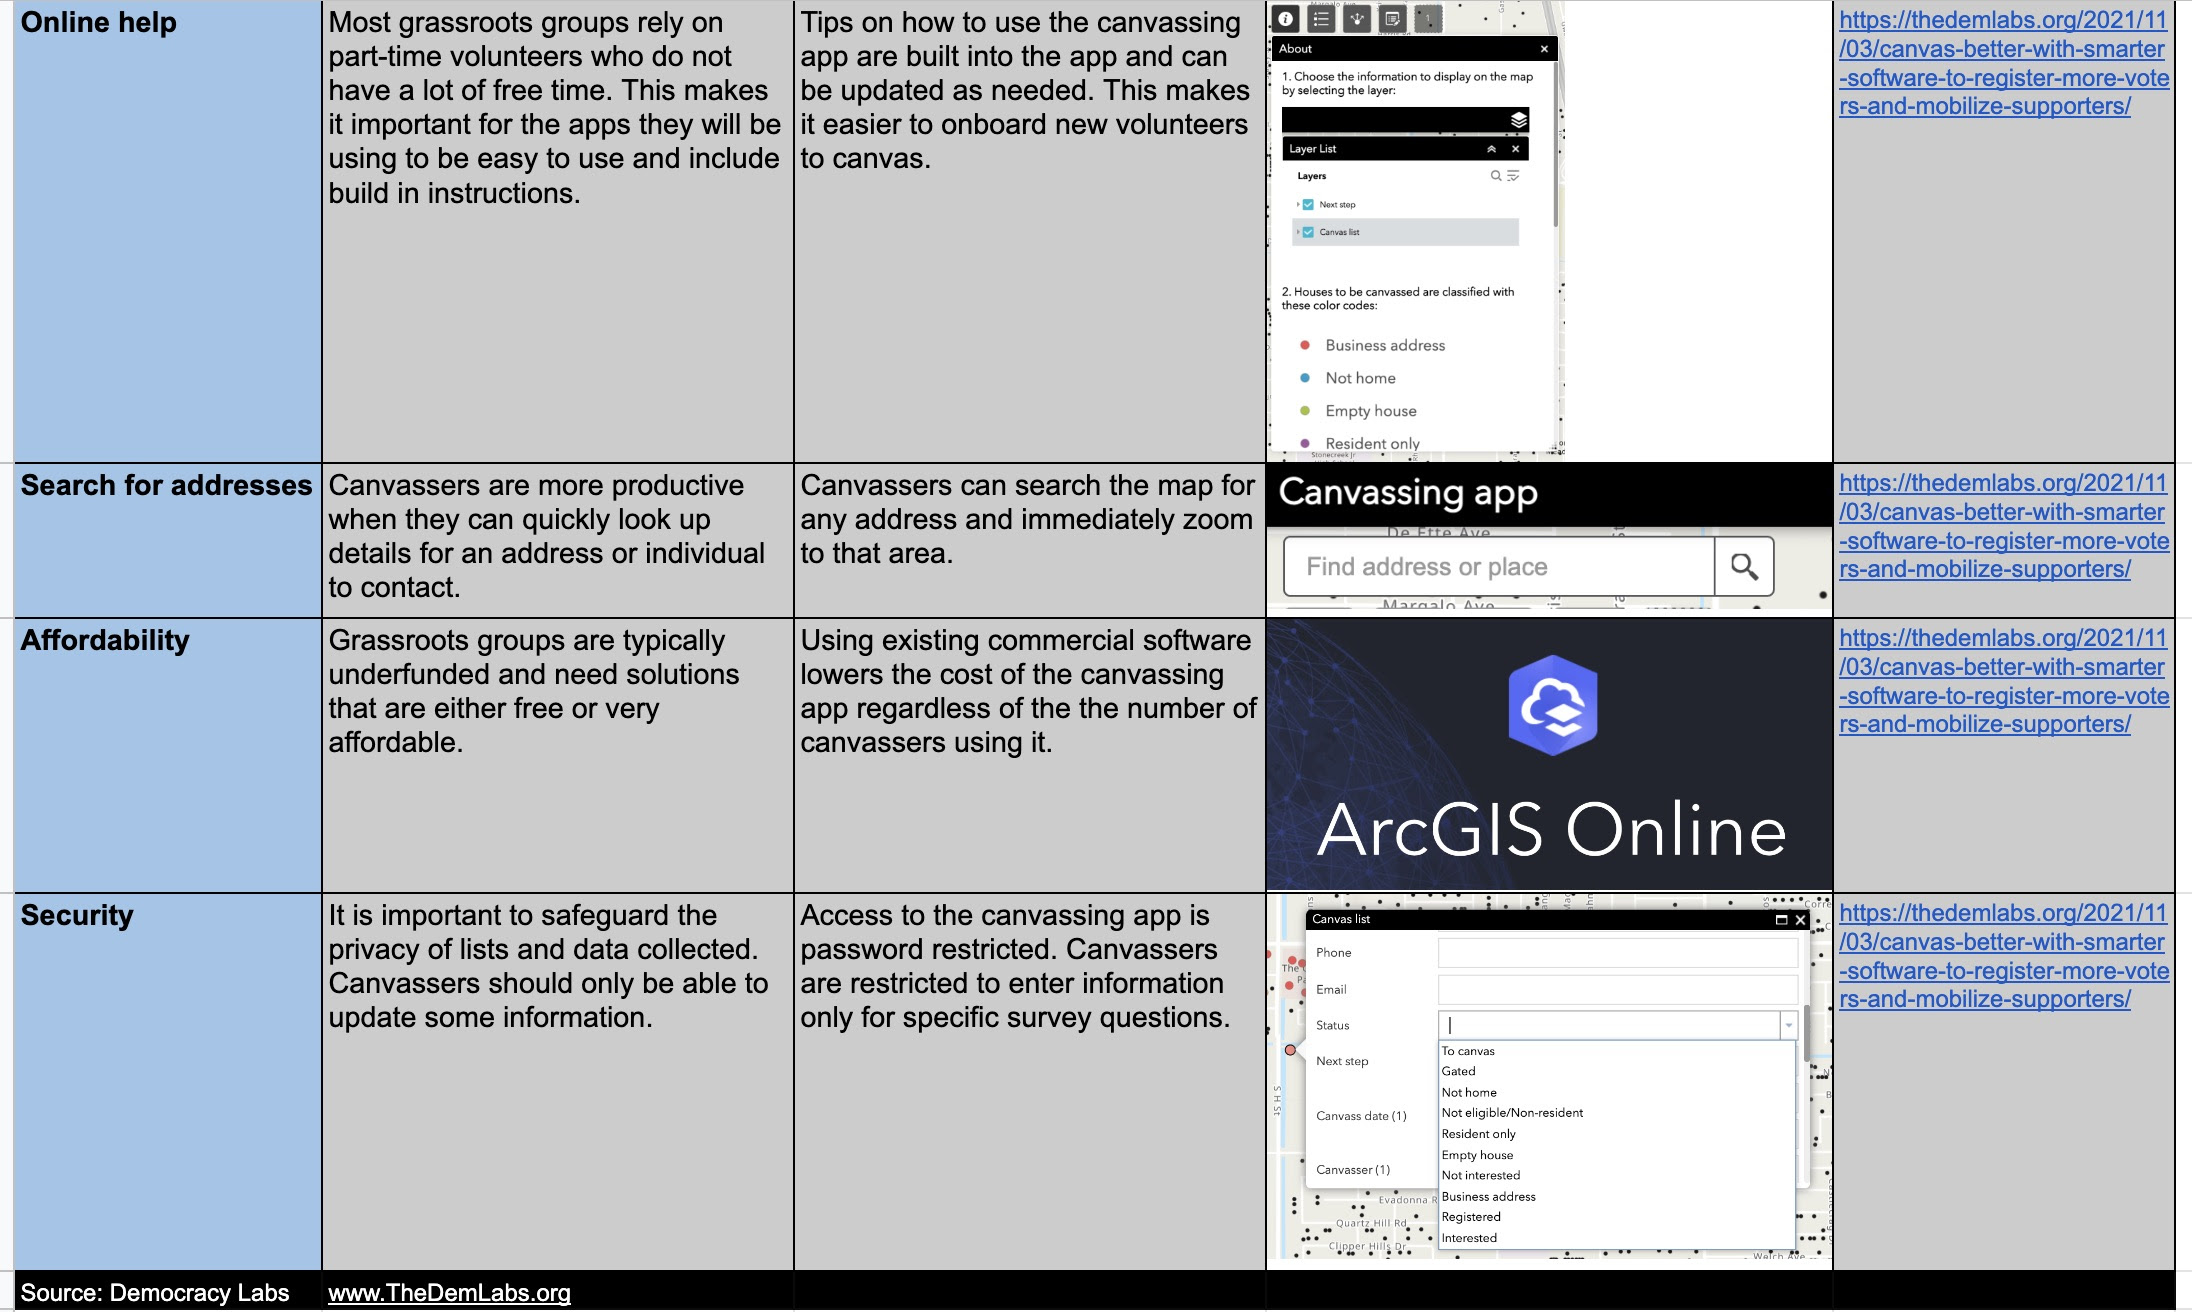 Grassroots innovations in canvassing with ArcGIS Online to create affordable and innovative canvassing solutions